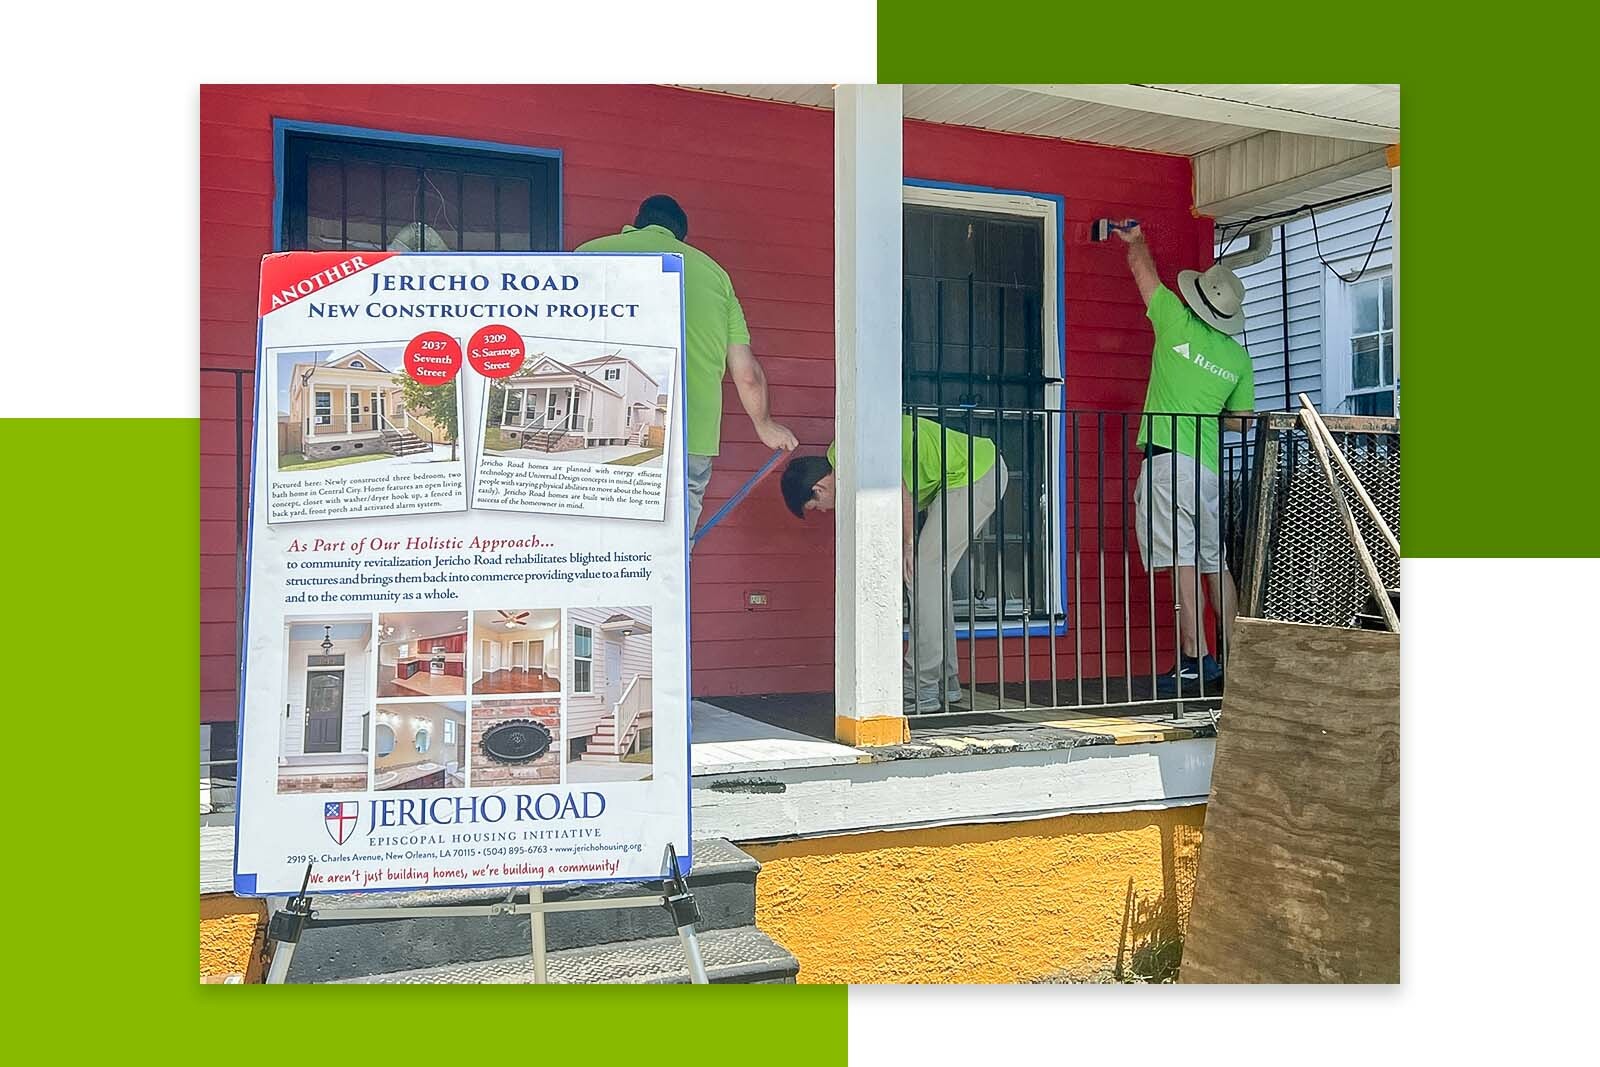 3 men painting a house red on the front porch. A sign for the Jericho Road New Construction Project is in the foreground in front of the porch.